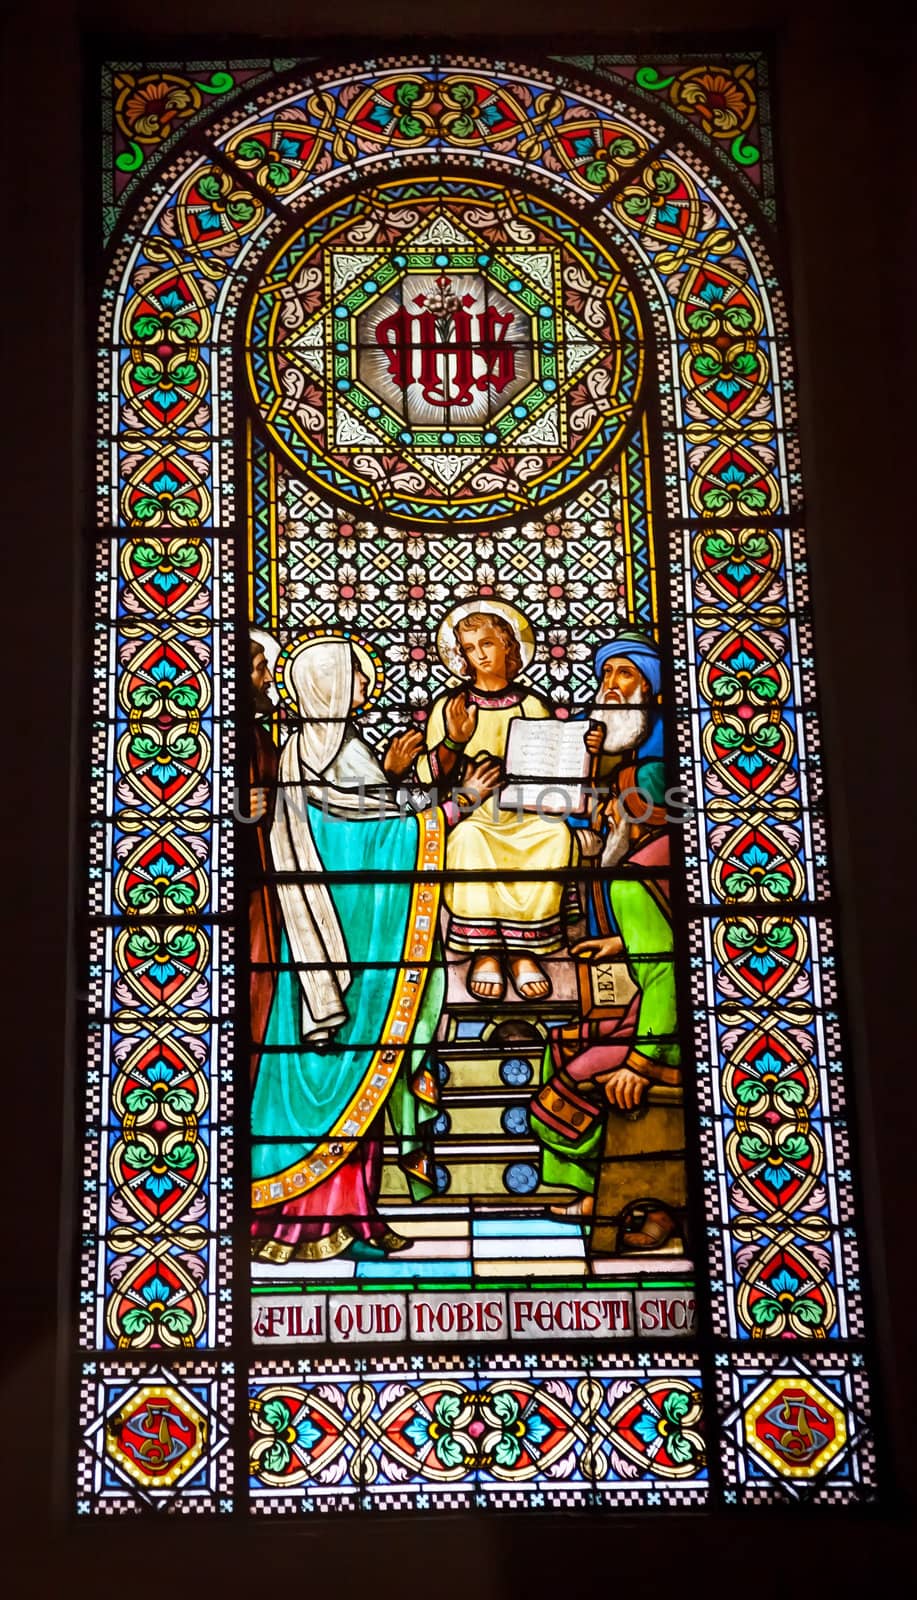 Stained glass window young Jesus teaching temple Mary in basilica inside Monestir Monastery of Montserrat, Barcelona, Catolonia, Spain.  Founded in the 9th century, destroyed in 1811 when French invaded Spain. Rebuilt in 1844 and now a Benedictine monastery.  Placa de Santa Maria.